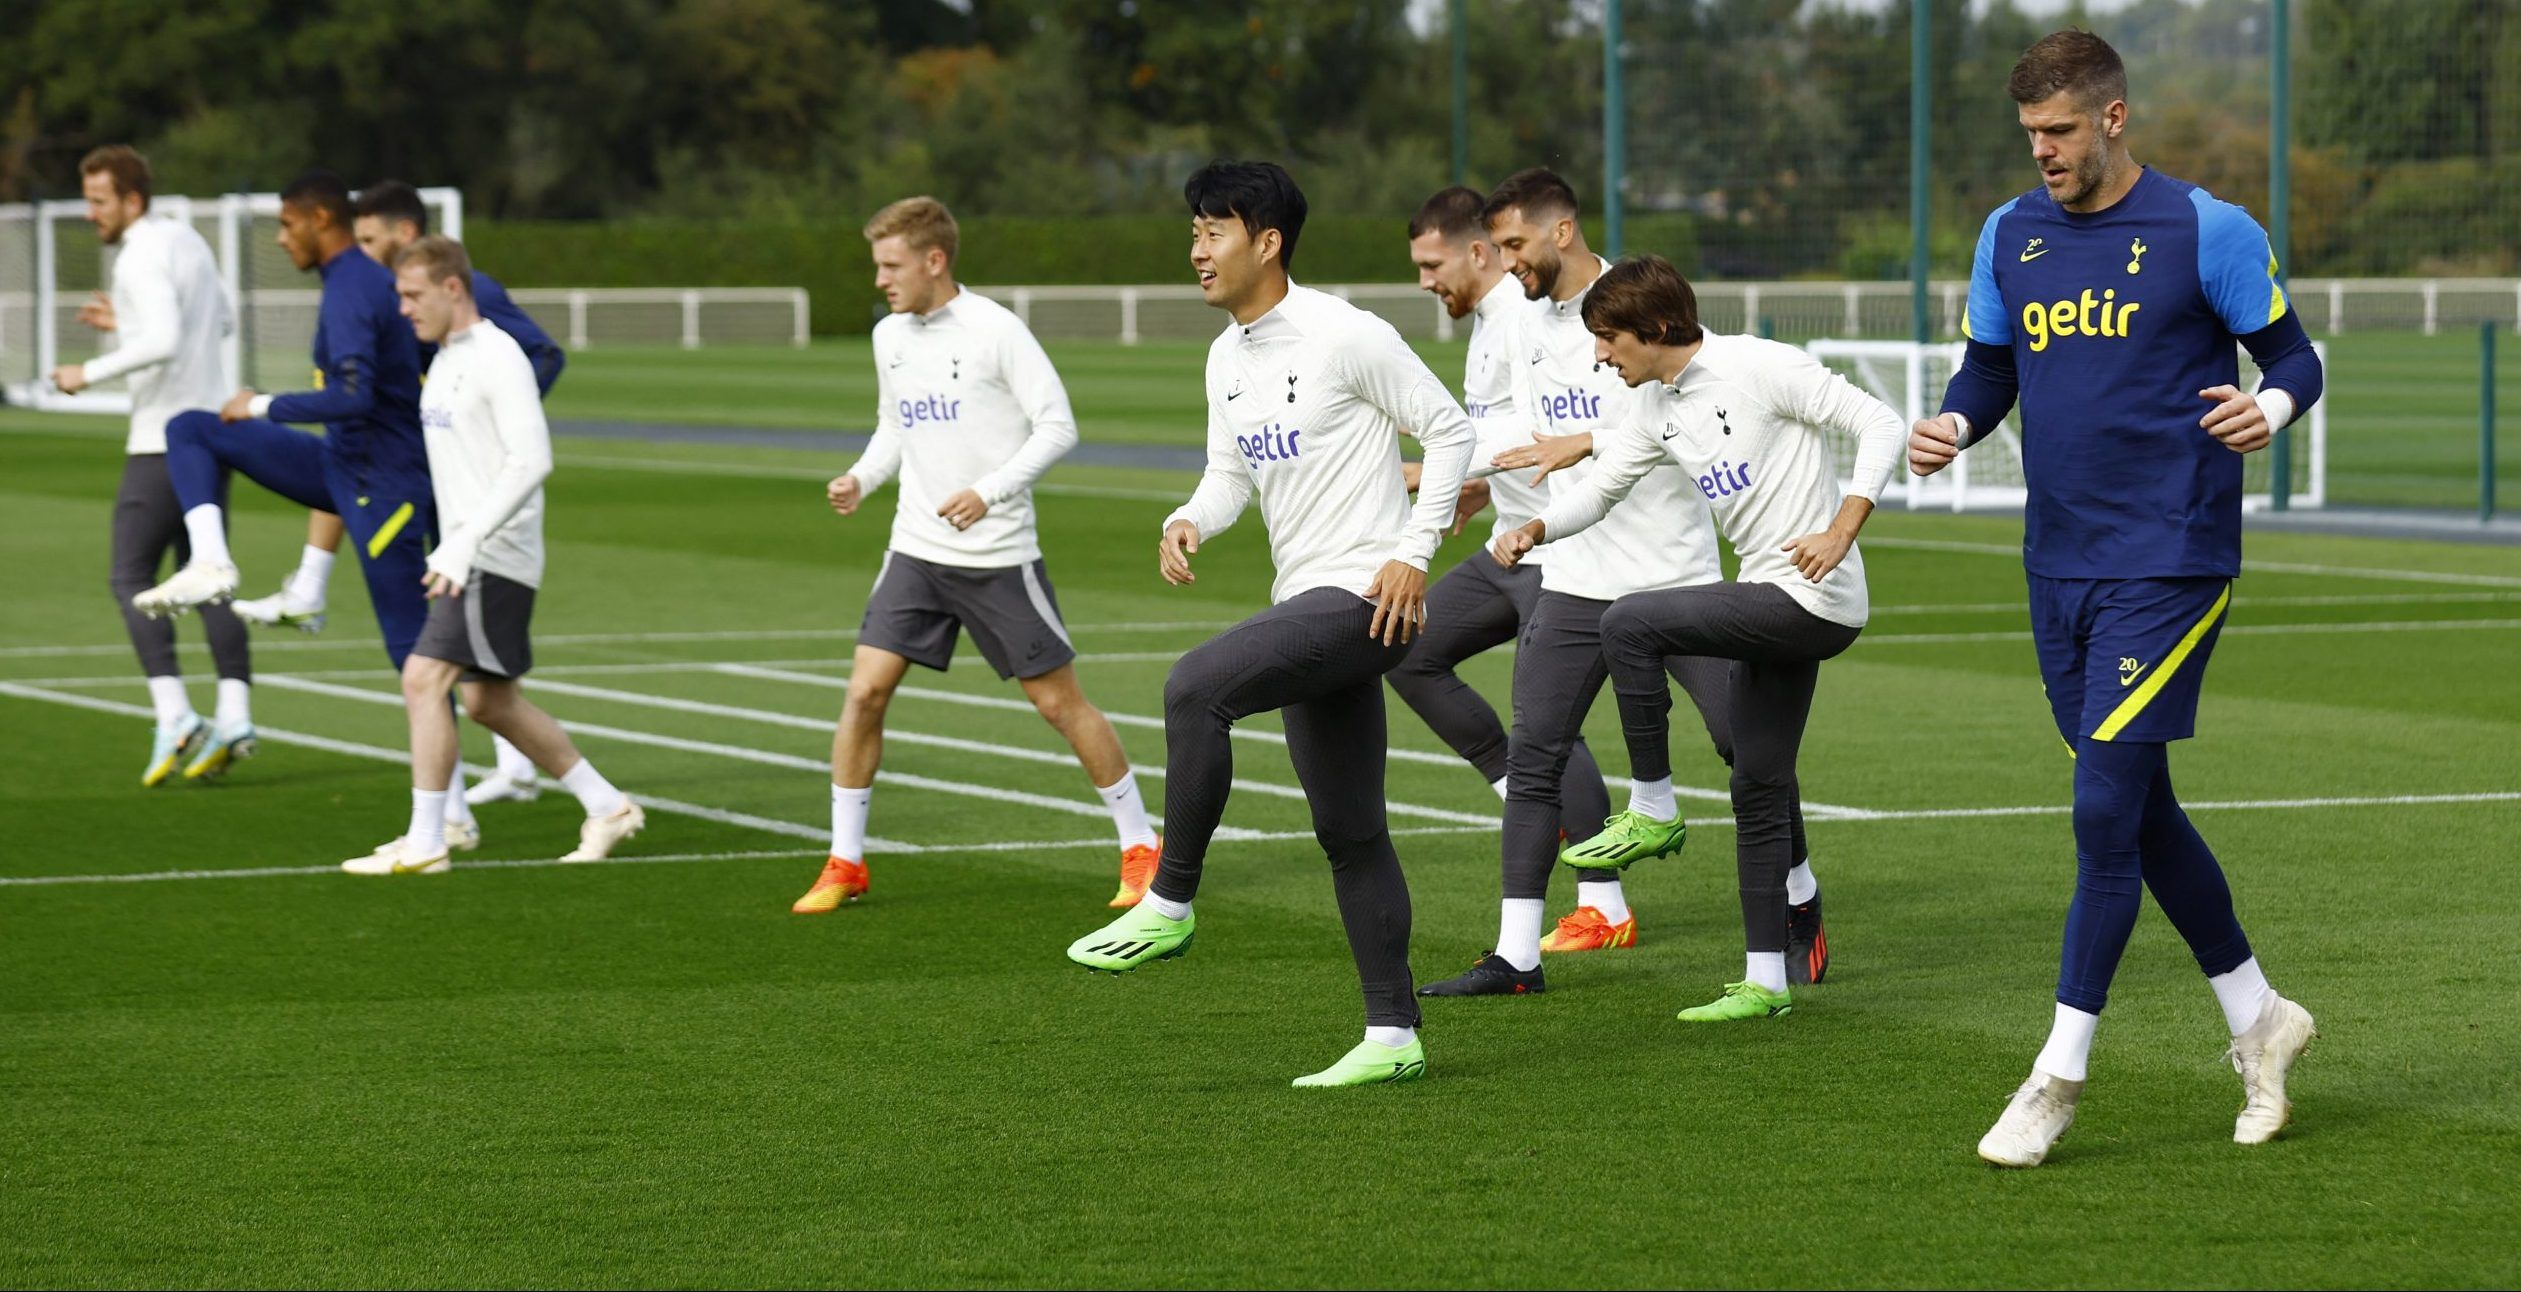 Tottenham Hotspur's Son Heung-min, Fraser Forster and team mates during training